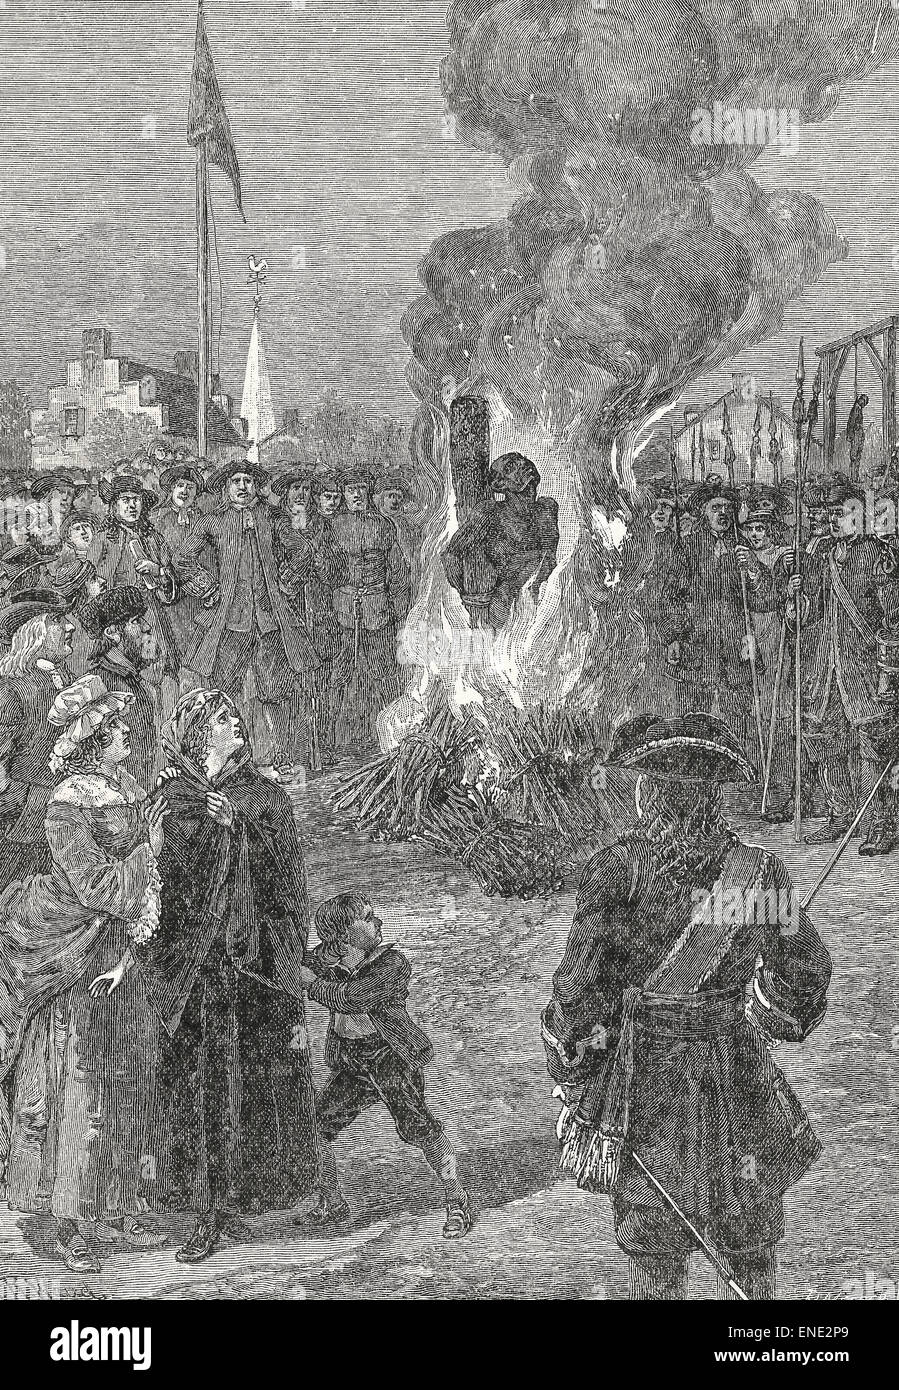 Burning Negroes in New York, 1700s Stock Photo